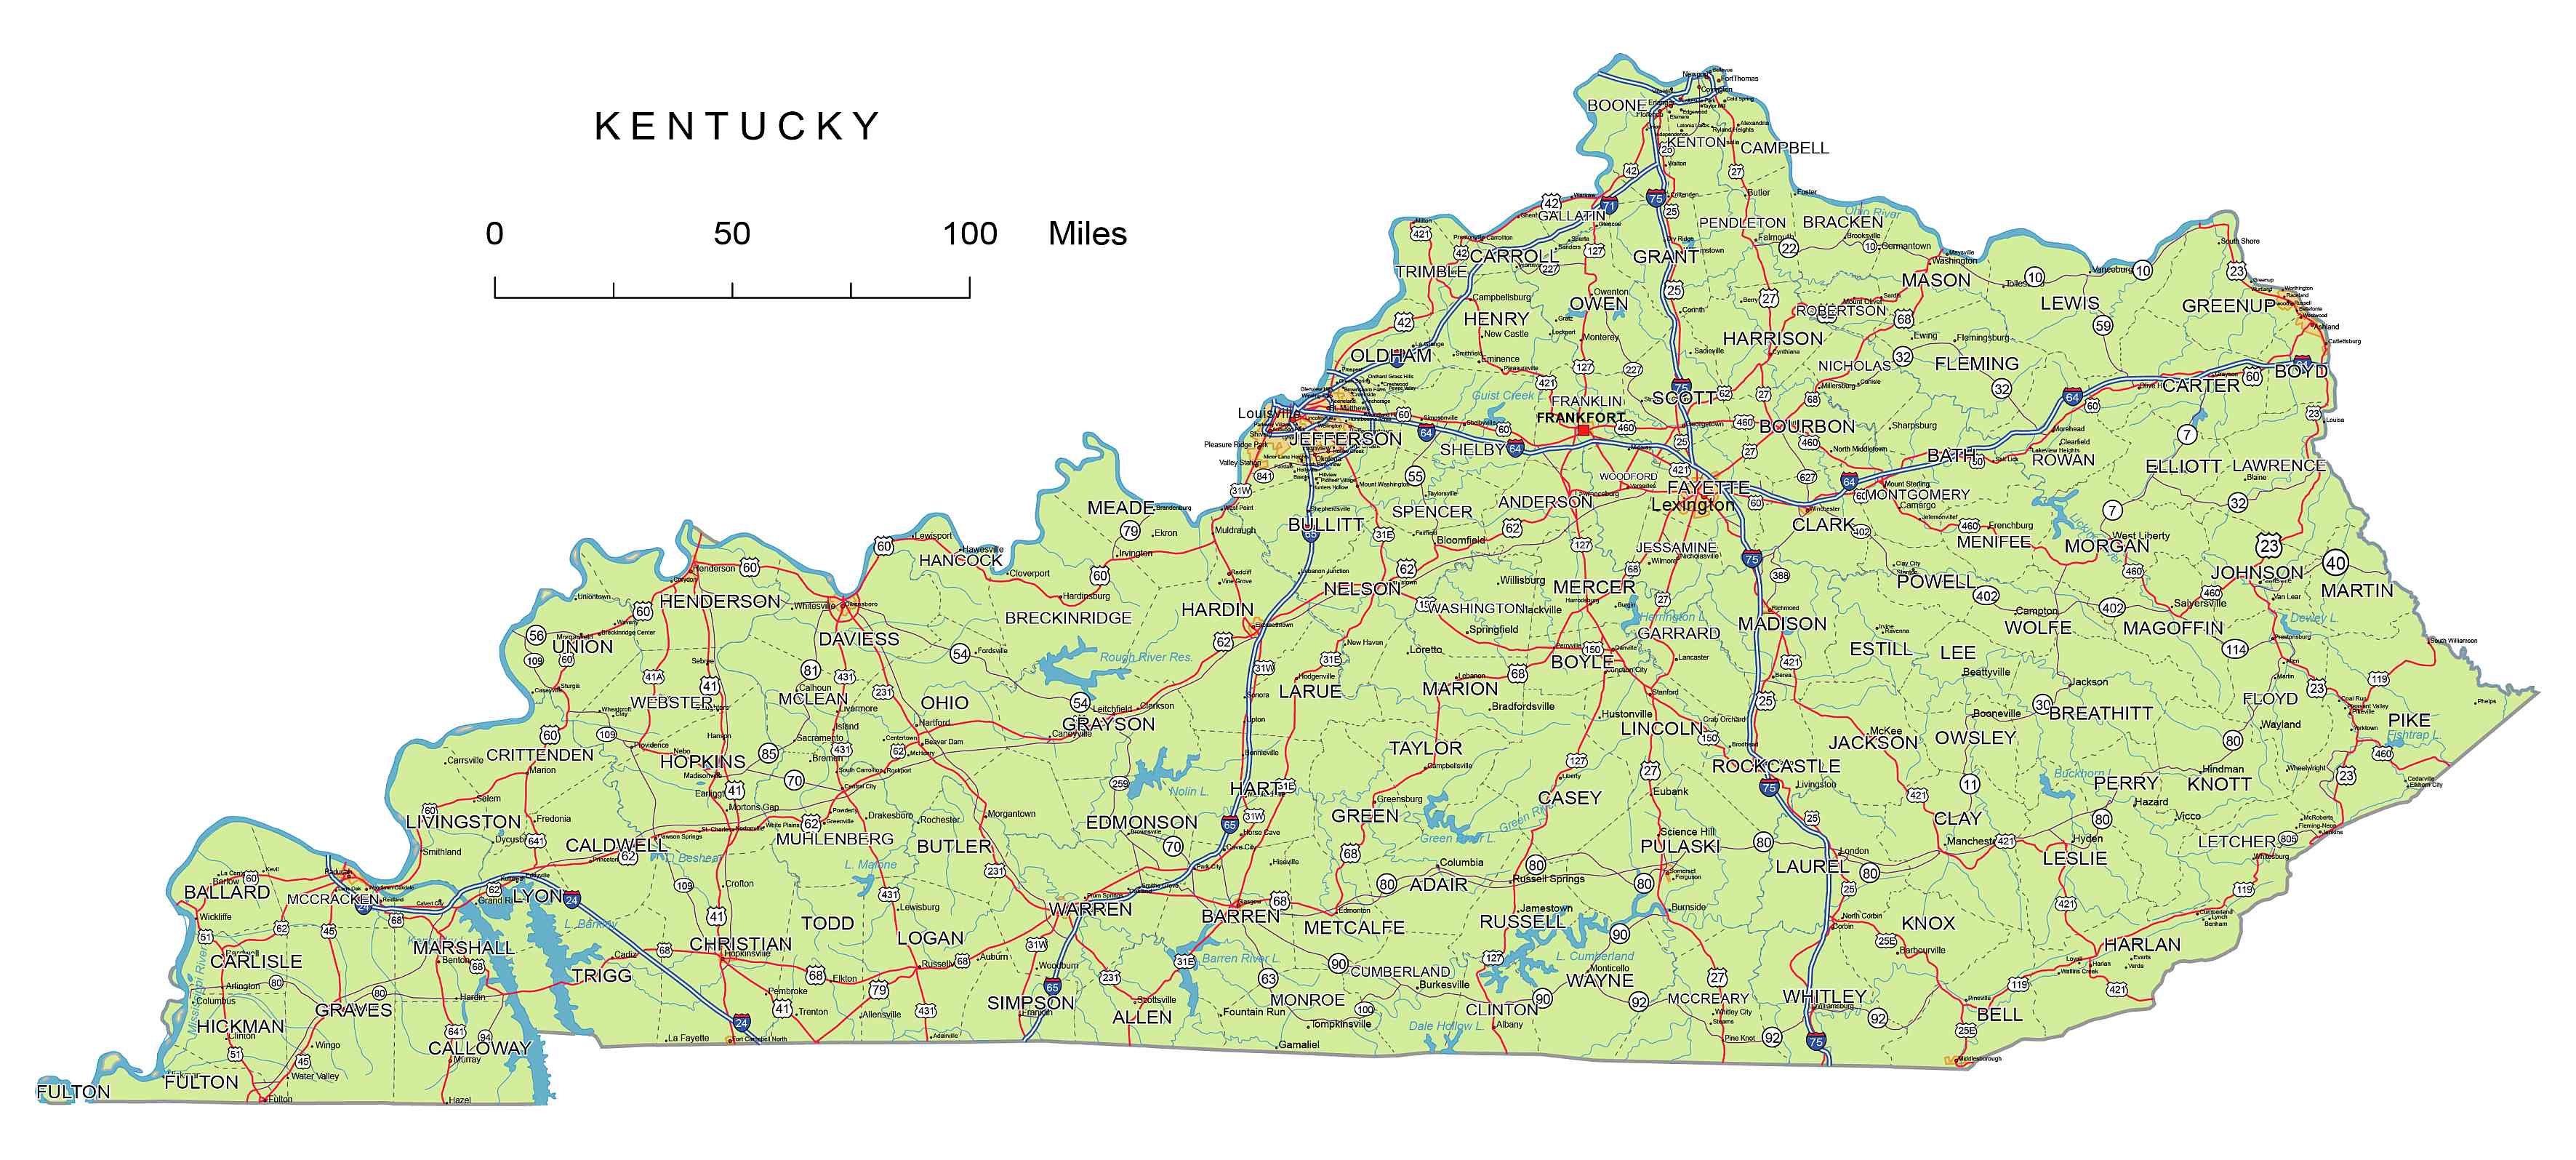 Preview of Kentucky State vector road map. - Your-Vector-Maps.com